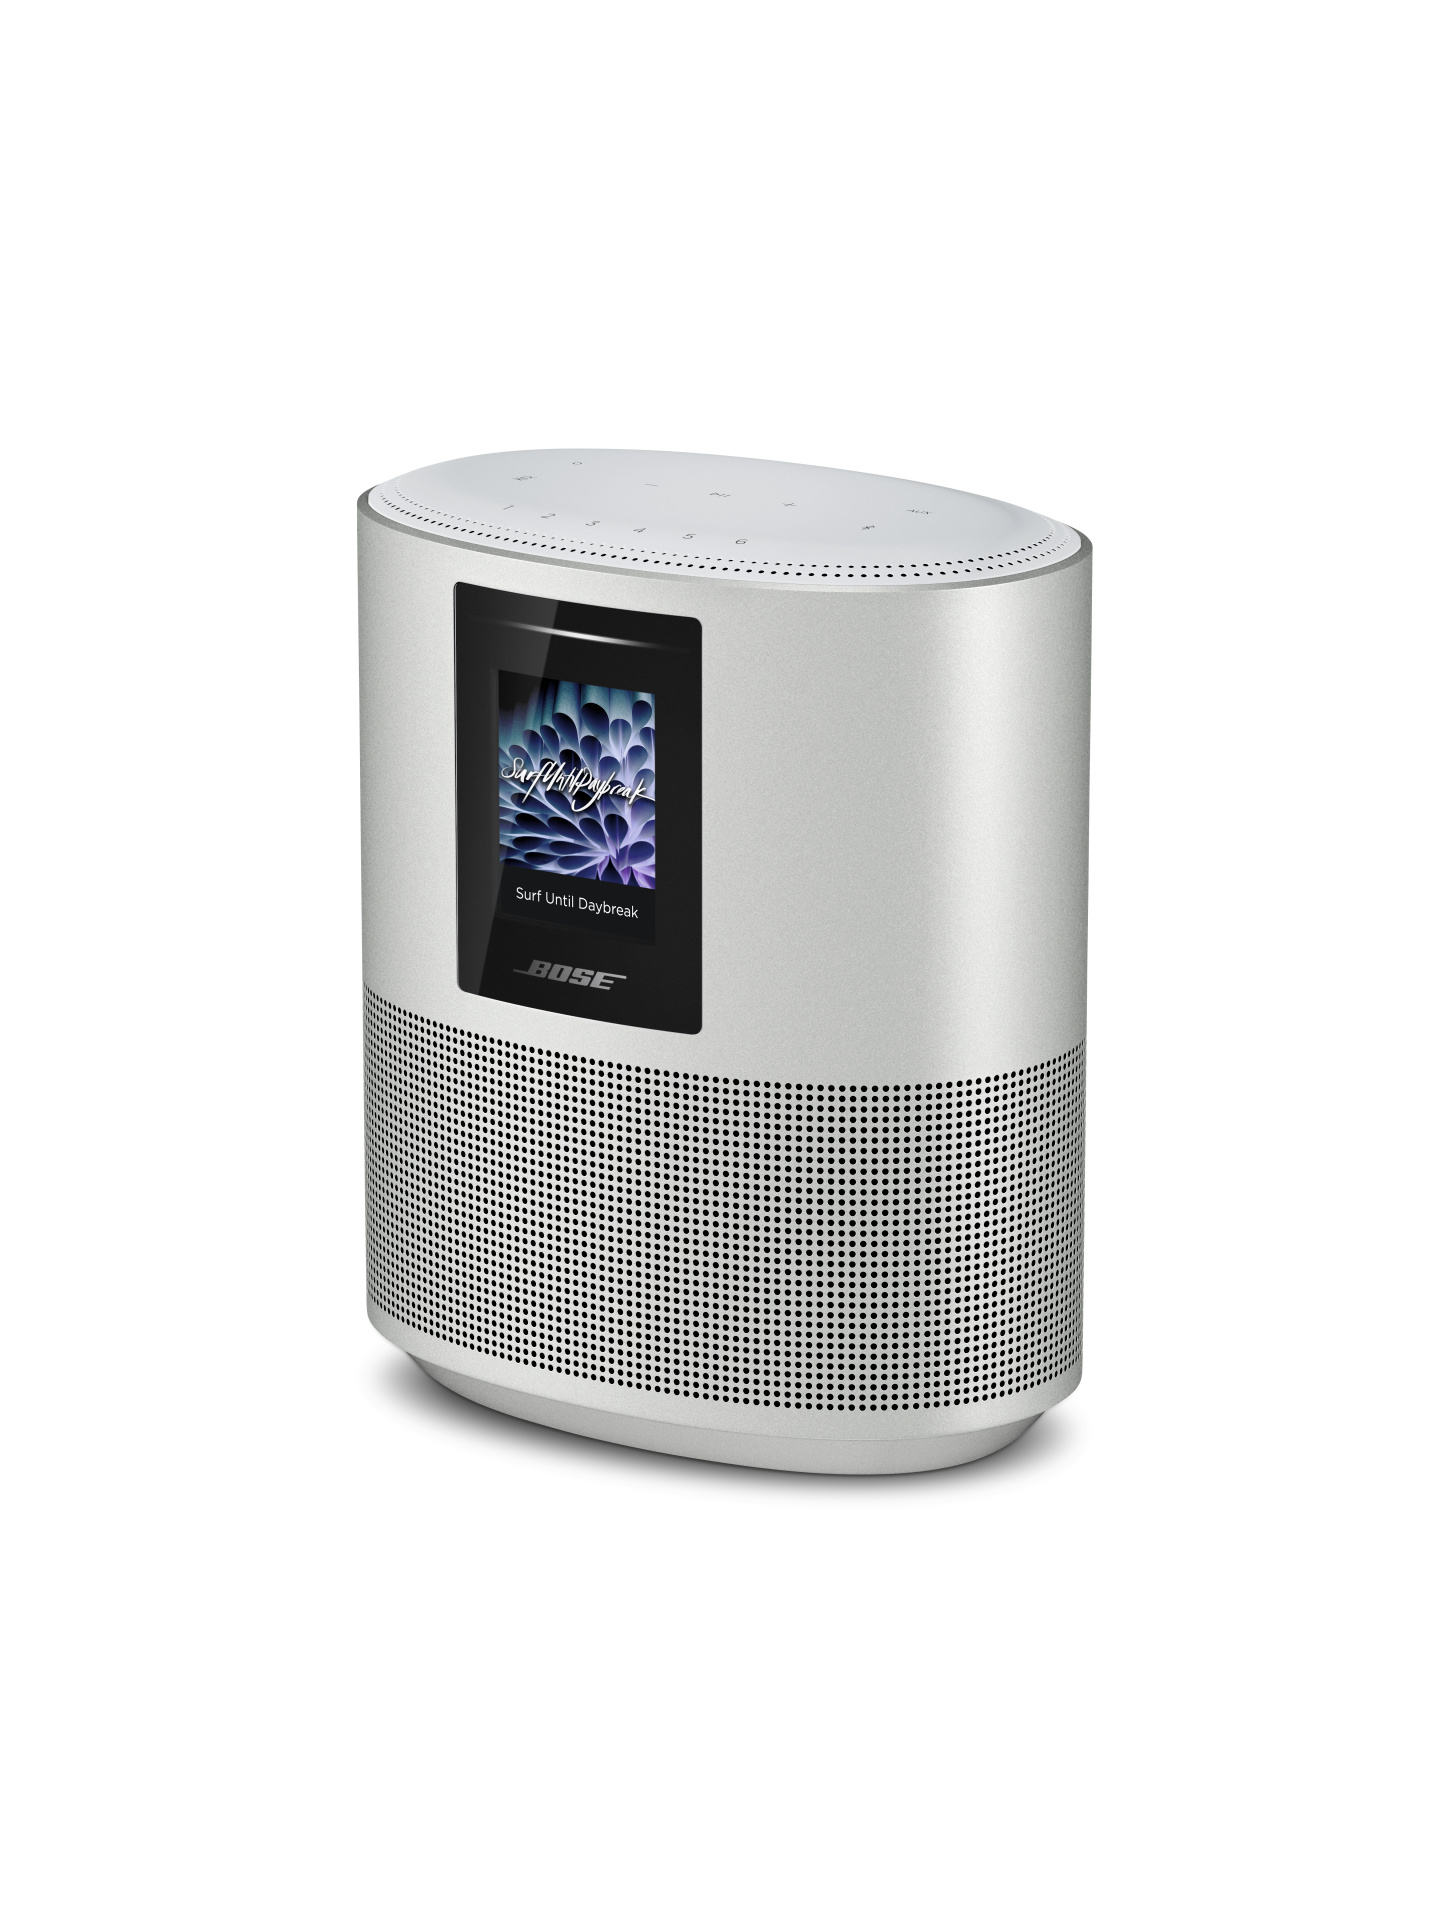 Bose Smart Speaker 500 with Wi-Fi, Bluetooth and Voice Control Built-in, Silver - image 3 of 6